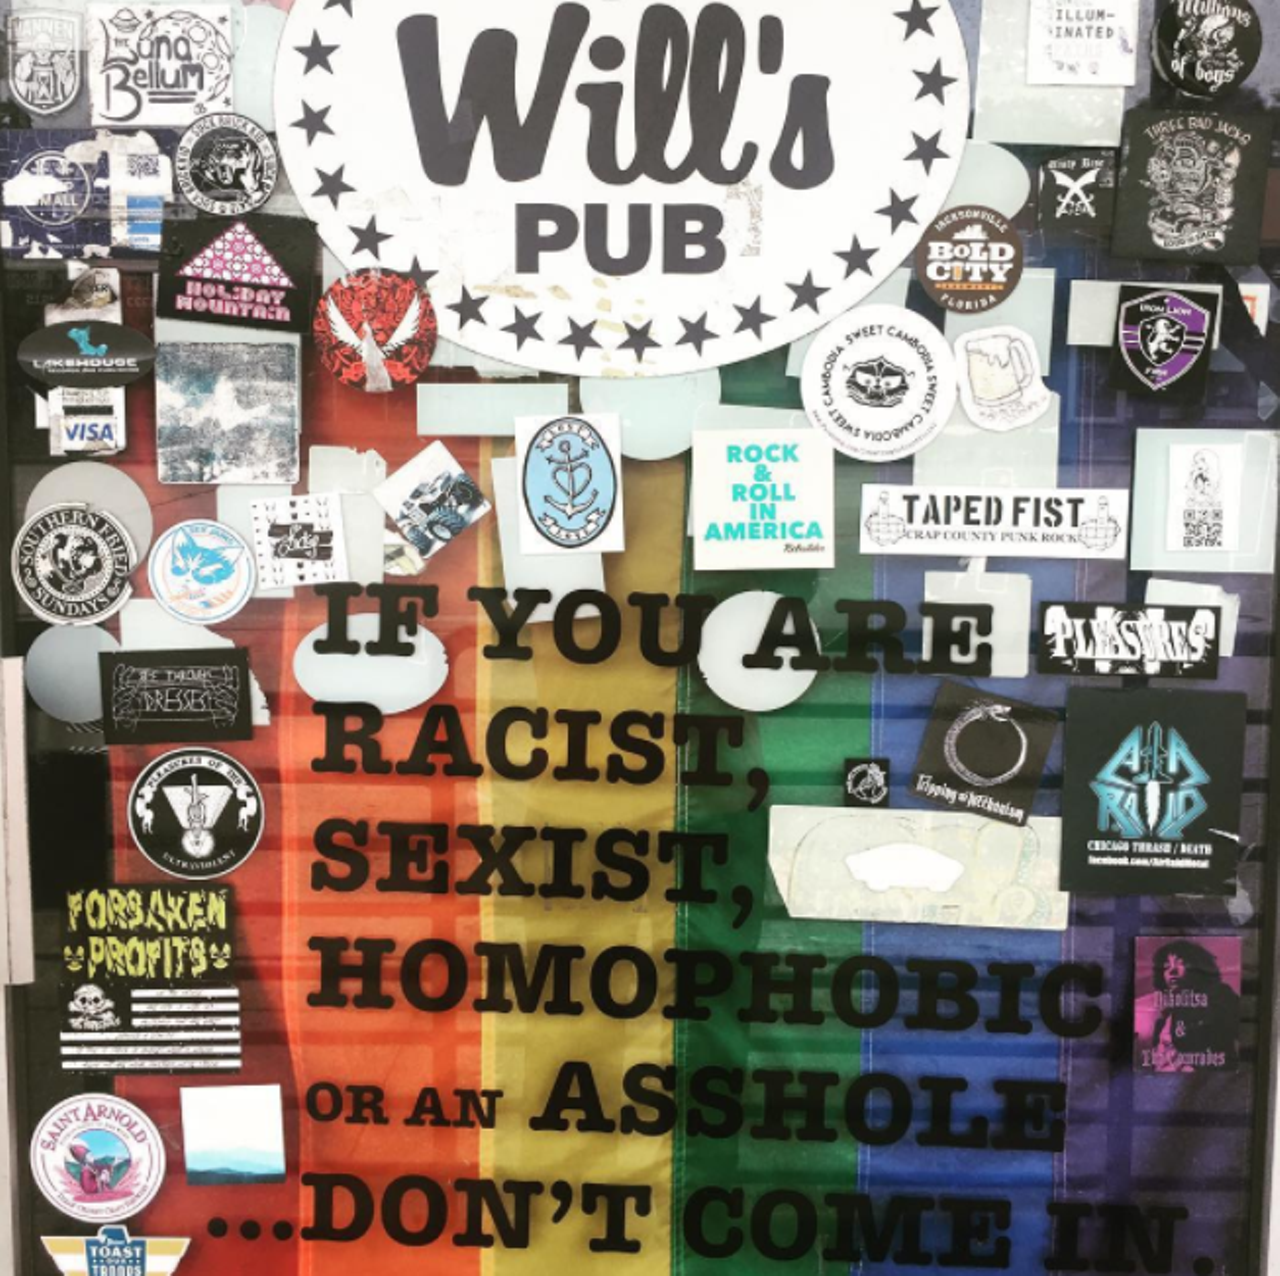 Will's Pub
1042 N Mills Ave, Orlando., 407-748-8256
A culture hub of Orlando, Will's is where any traveling act worth it's salt stops. Whether there's a show that night or not, with tons of quirky events and a great beer menu, Will's is a must stop. 
Photo via harpoonlarry/Instagram